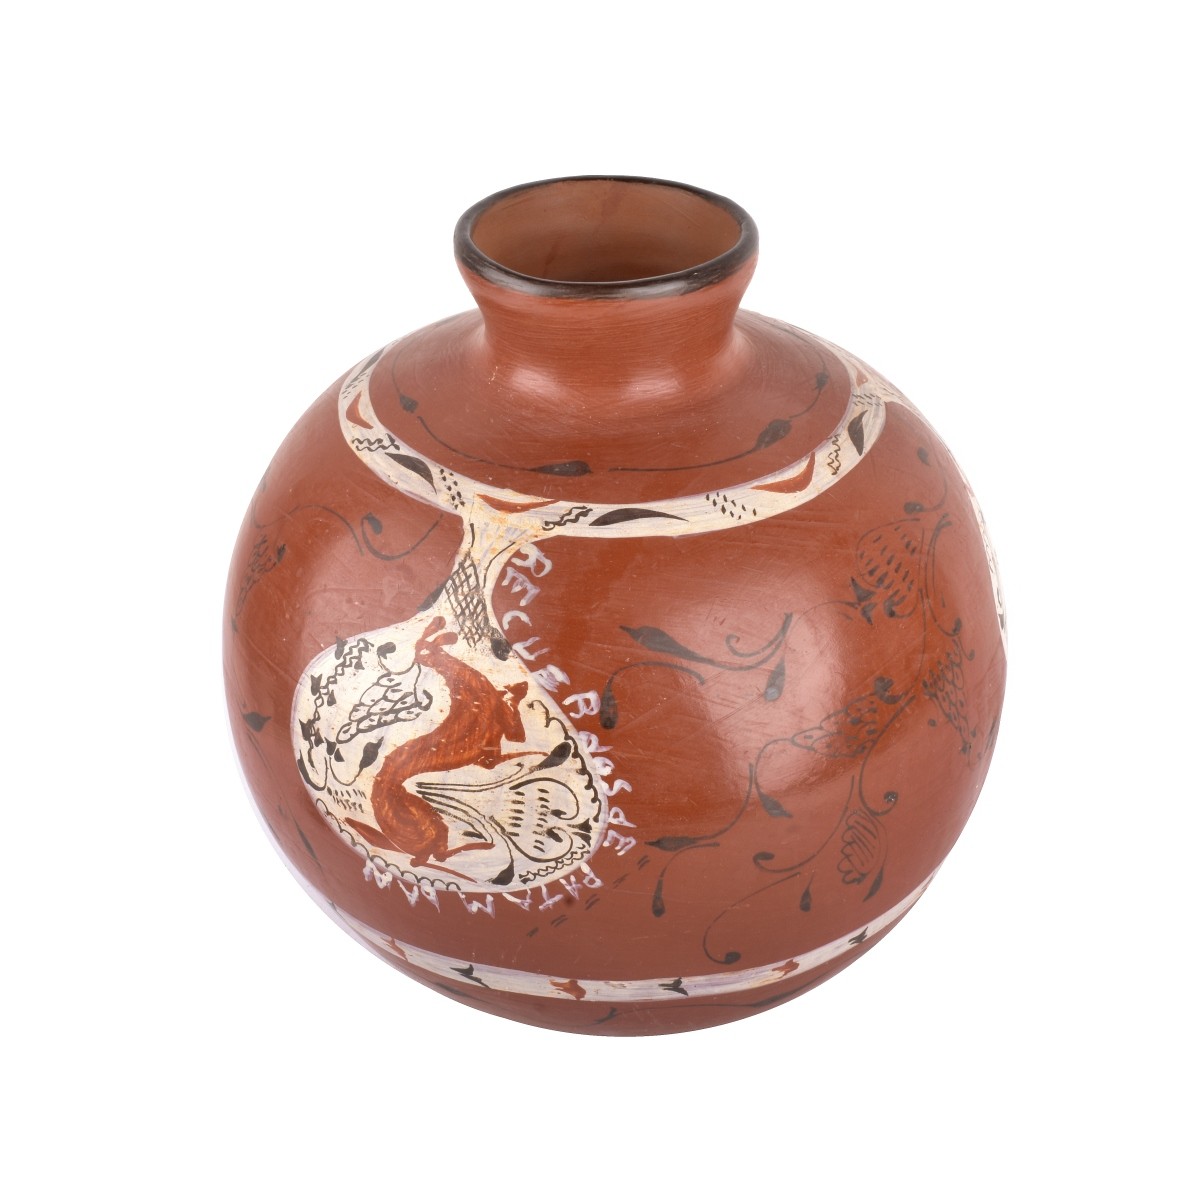 Mexican Pottery Vase